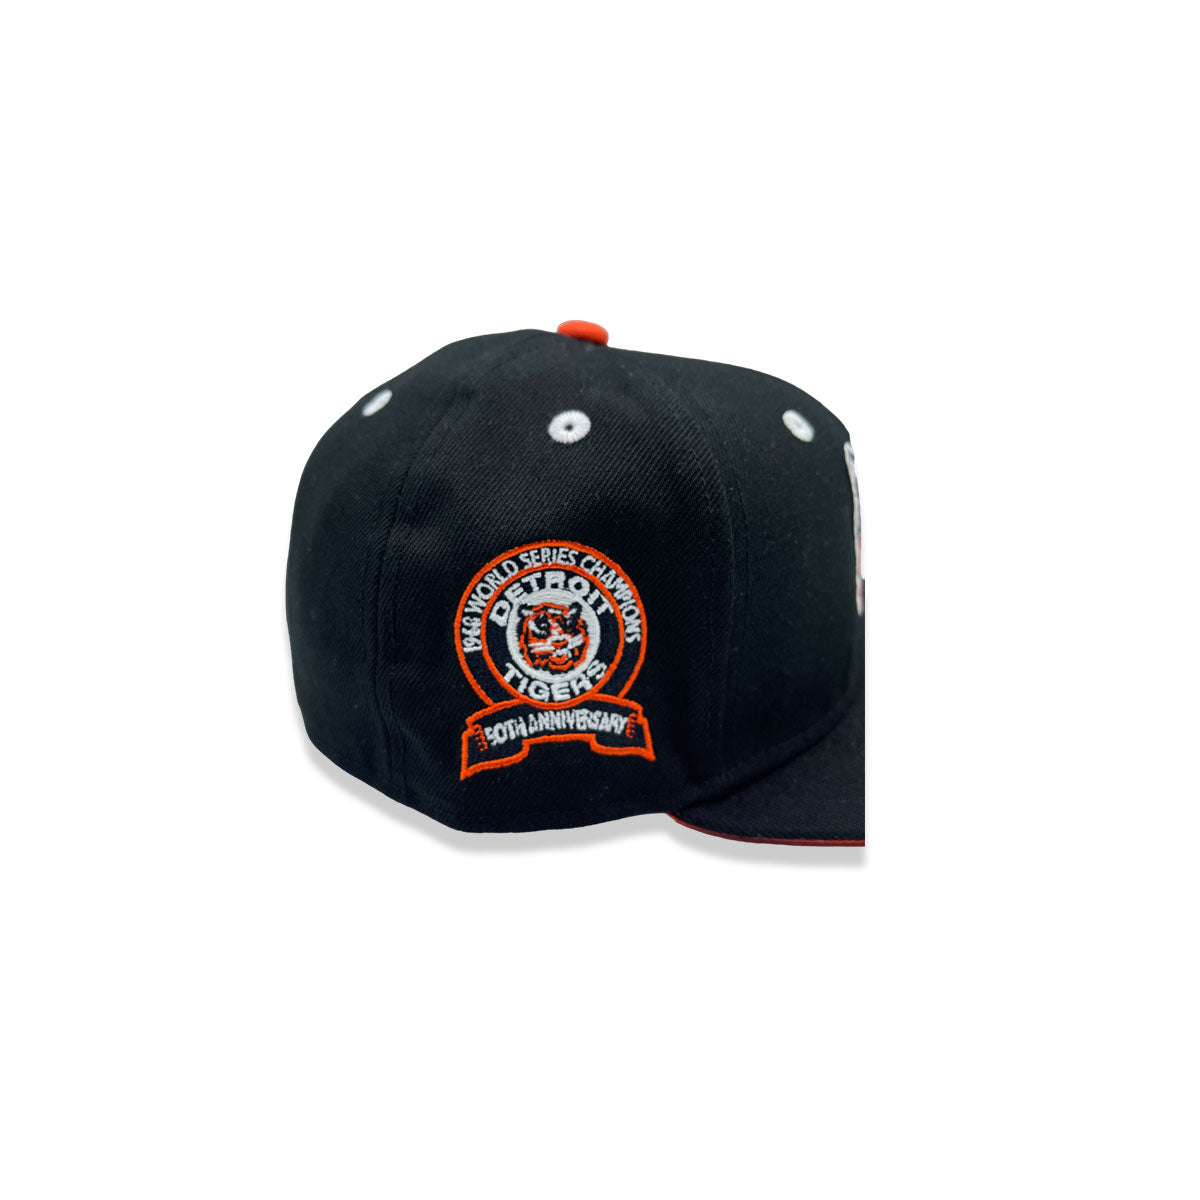 New Era 59Fifty Detroit Tigers 1968 World Series Patch Fitted Hat Black